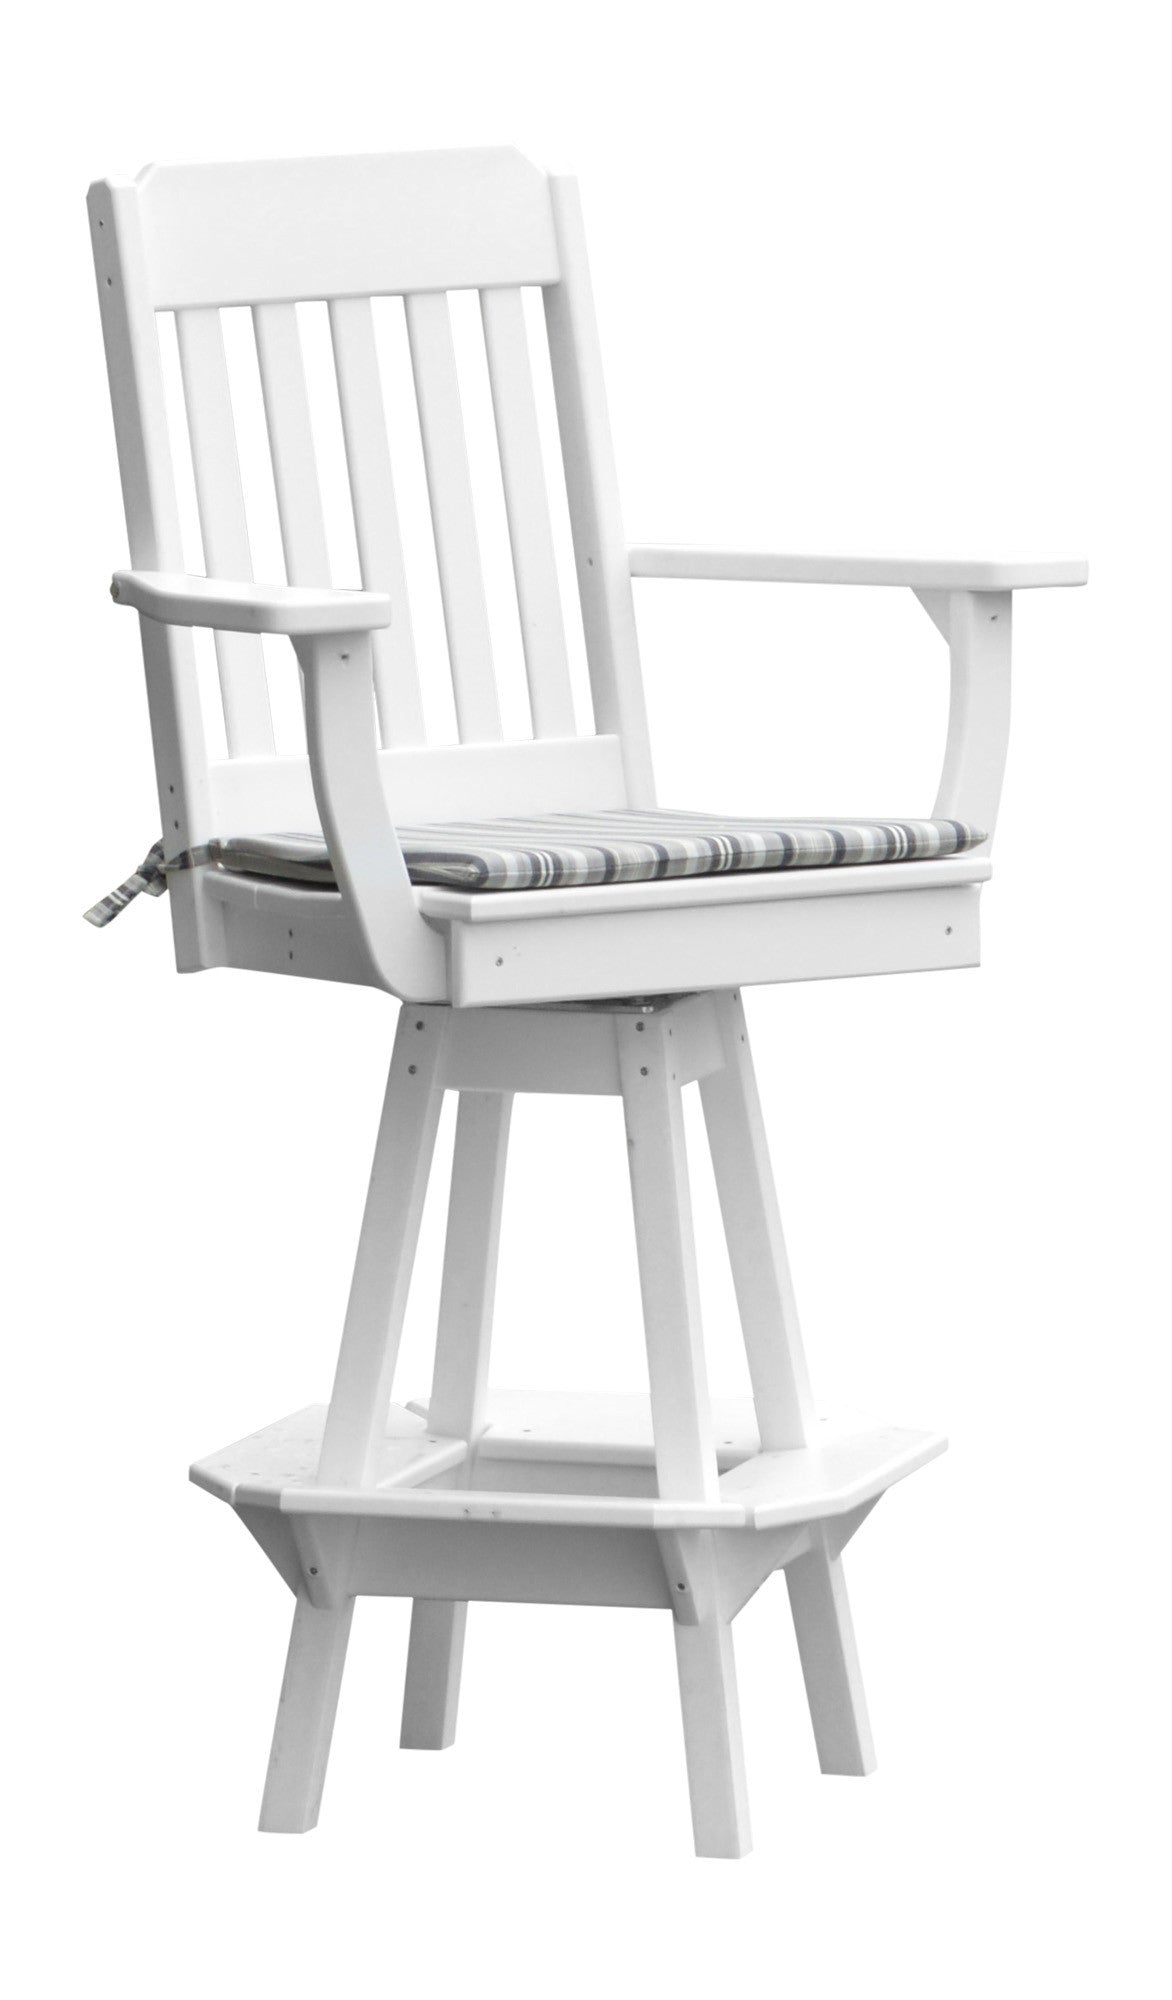 A&L Furniture Company Recycled Plastic Traditional Swivel Bar Chair w/ Arms - White